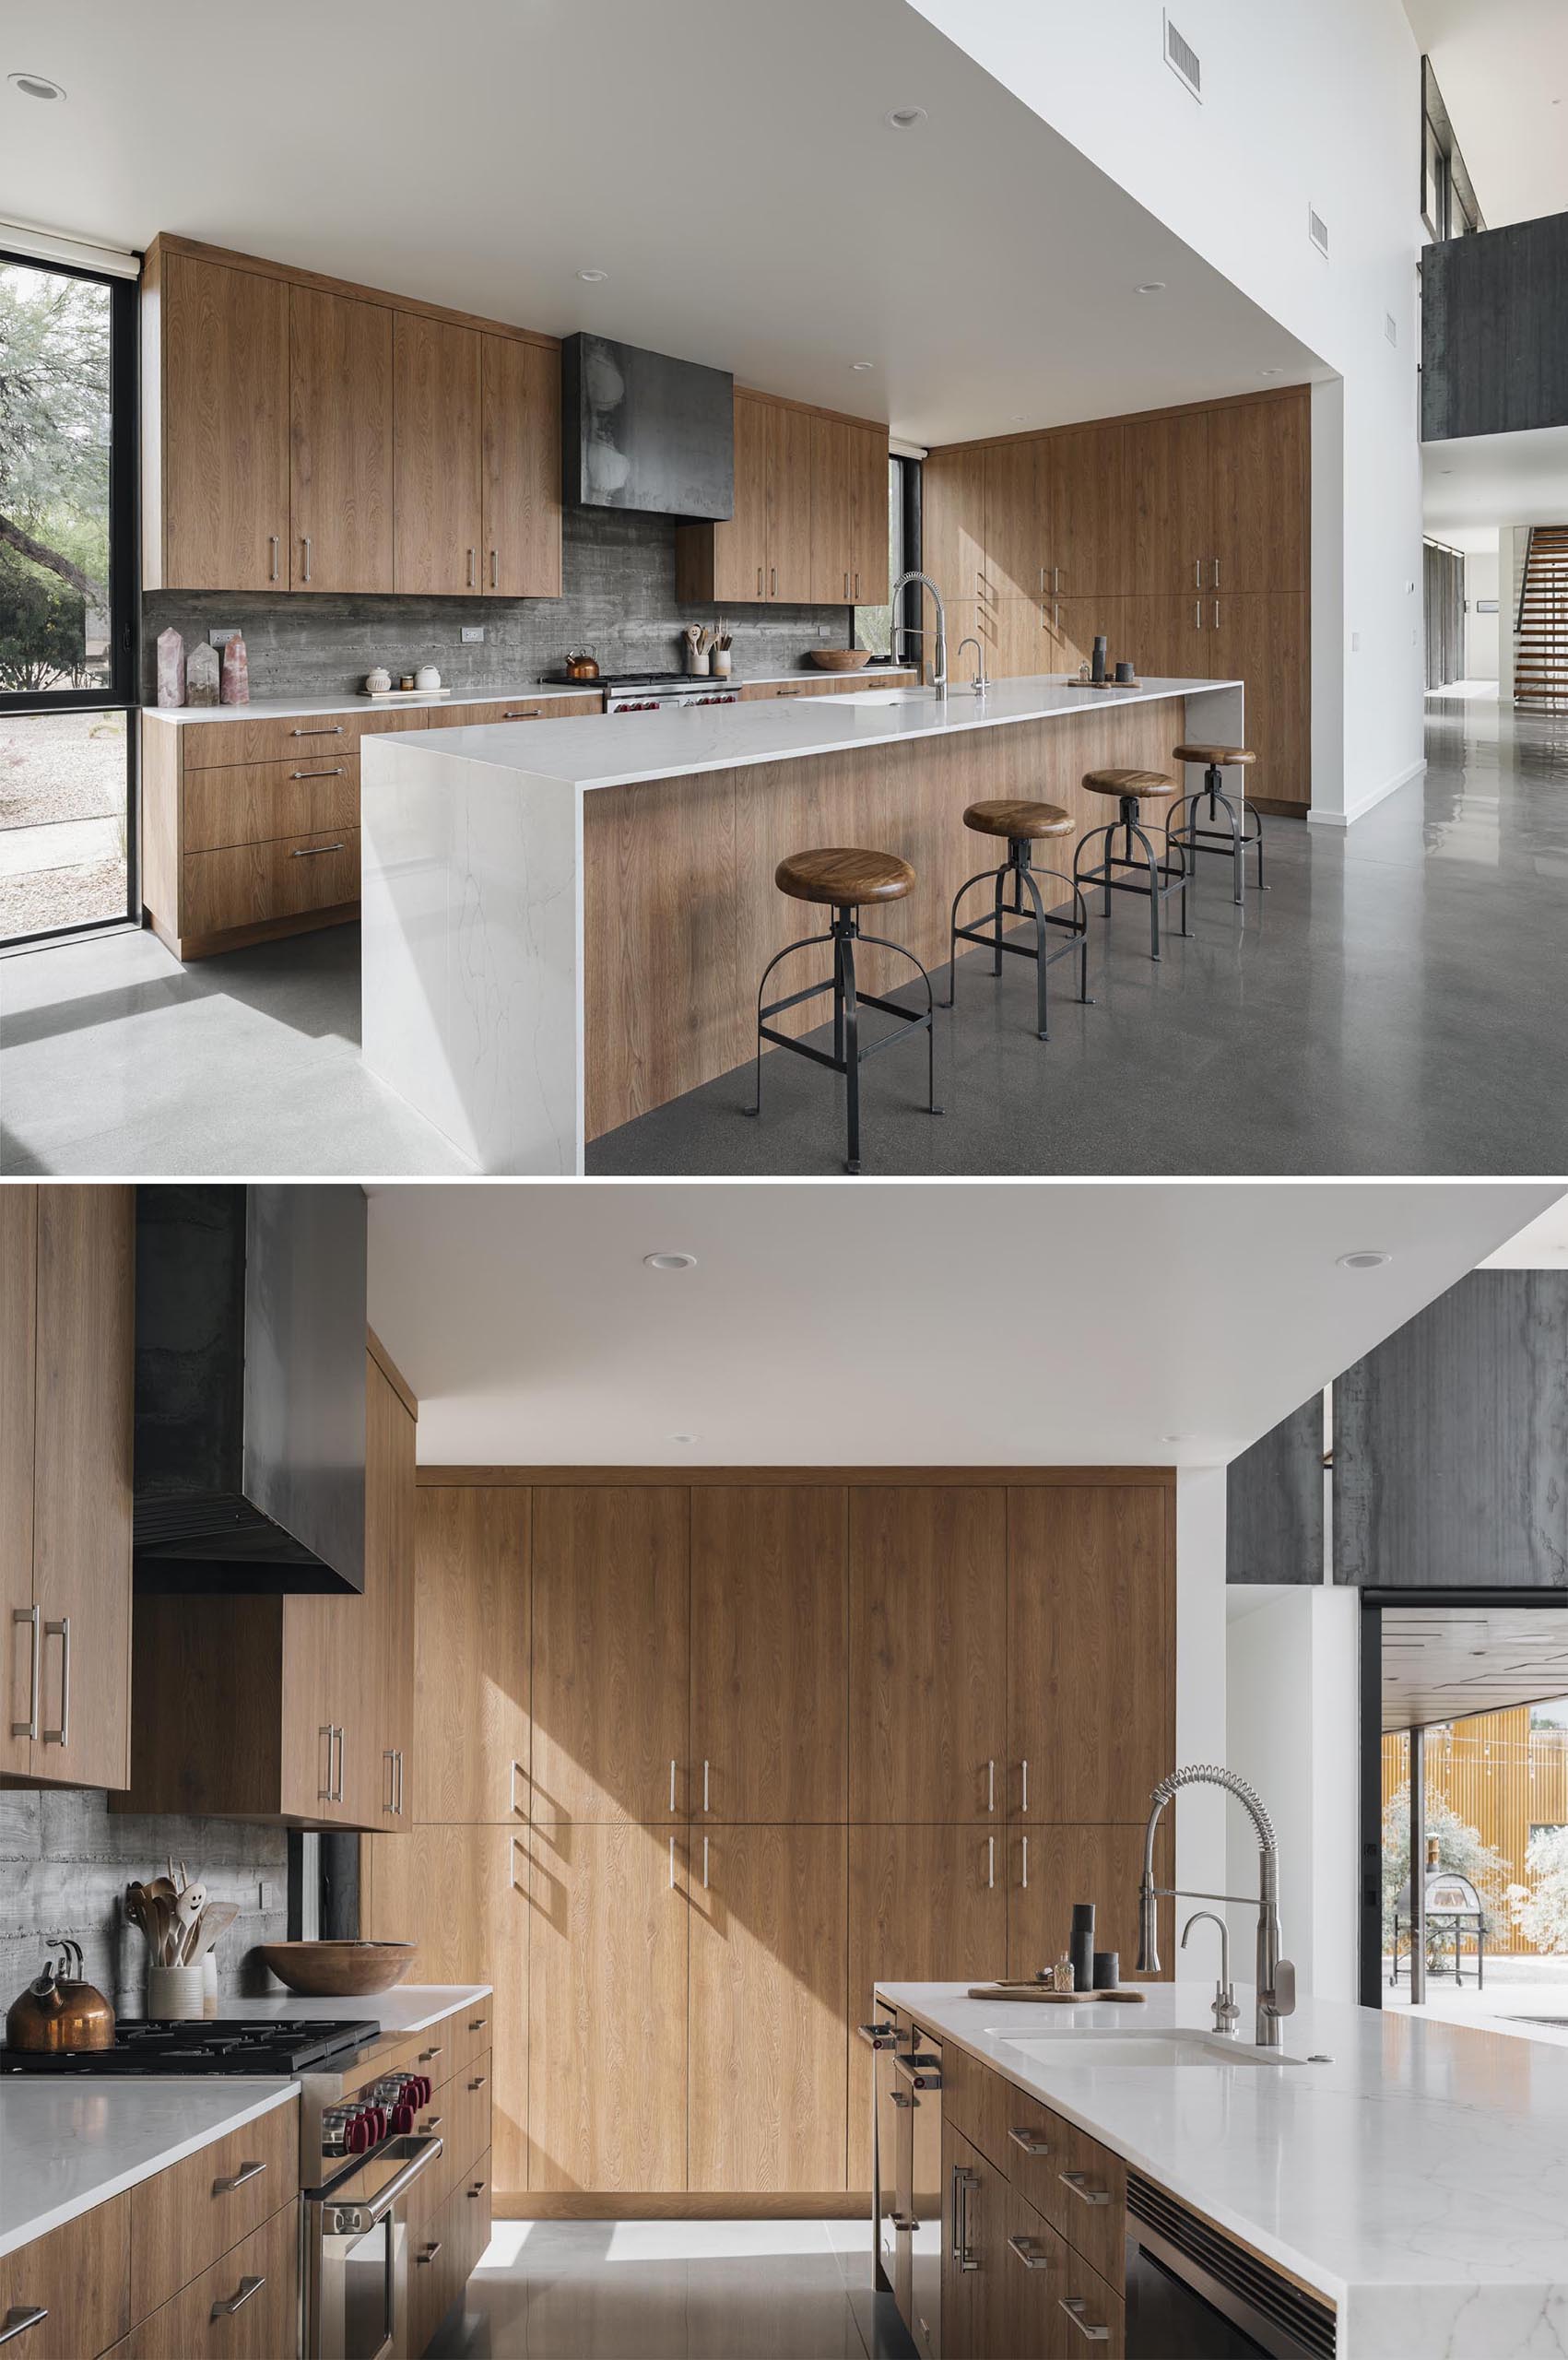 The wood cabinetry in the kitchen has been installed right up against the board-formed concrete wall, while a long kitchen island creates plenty of counter space.